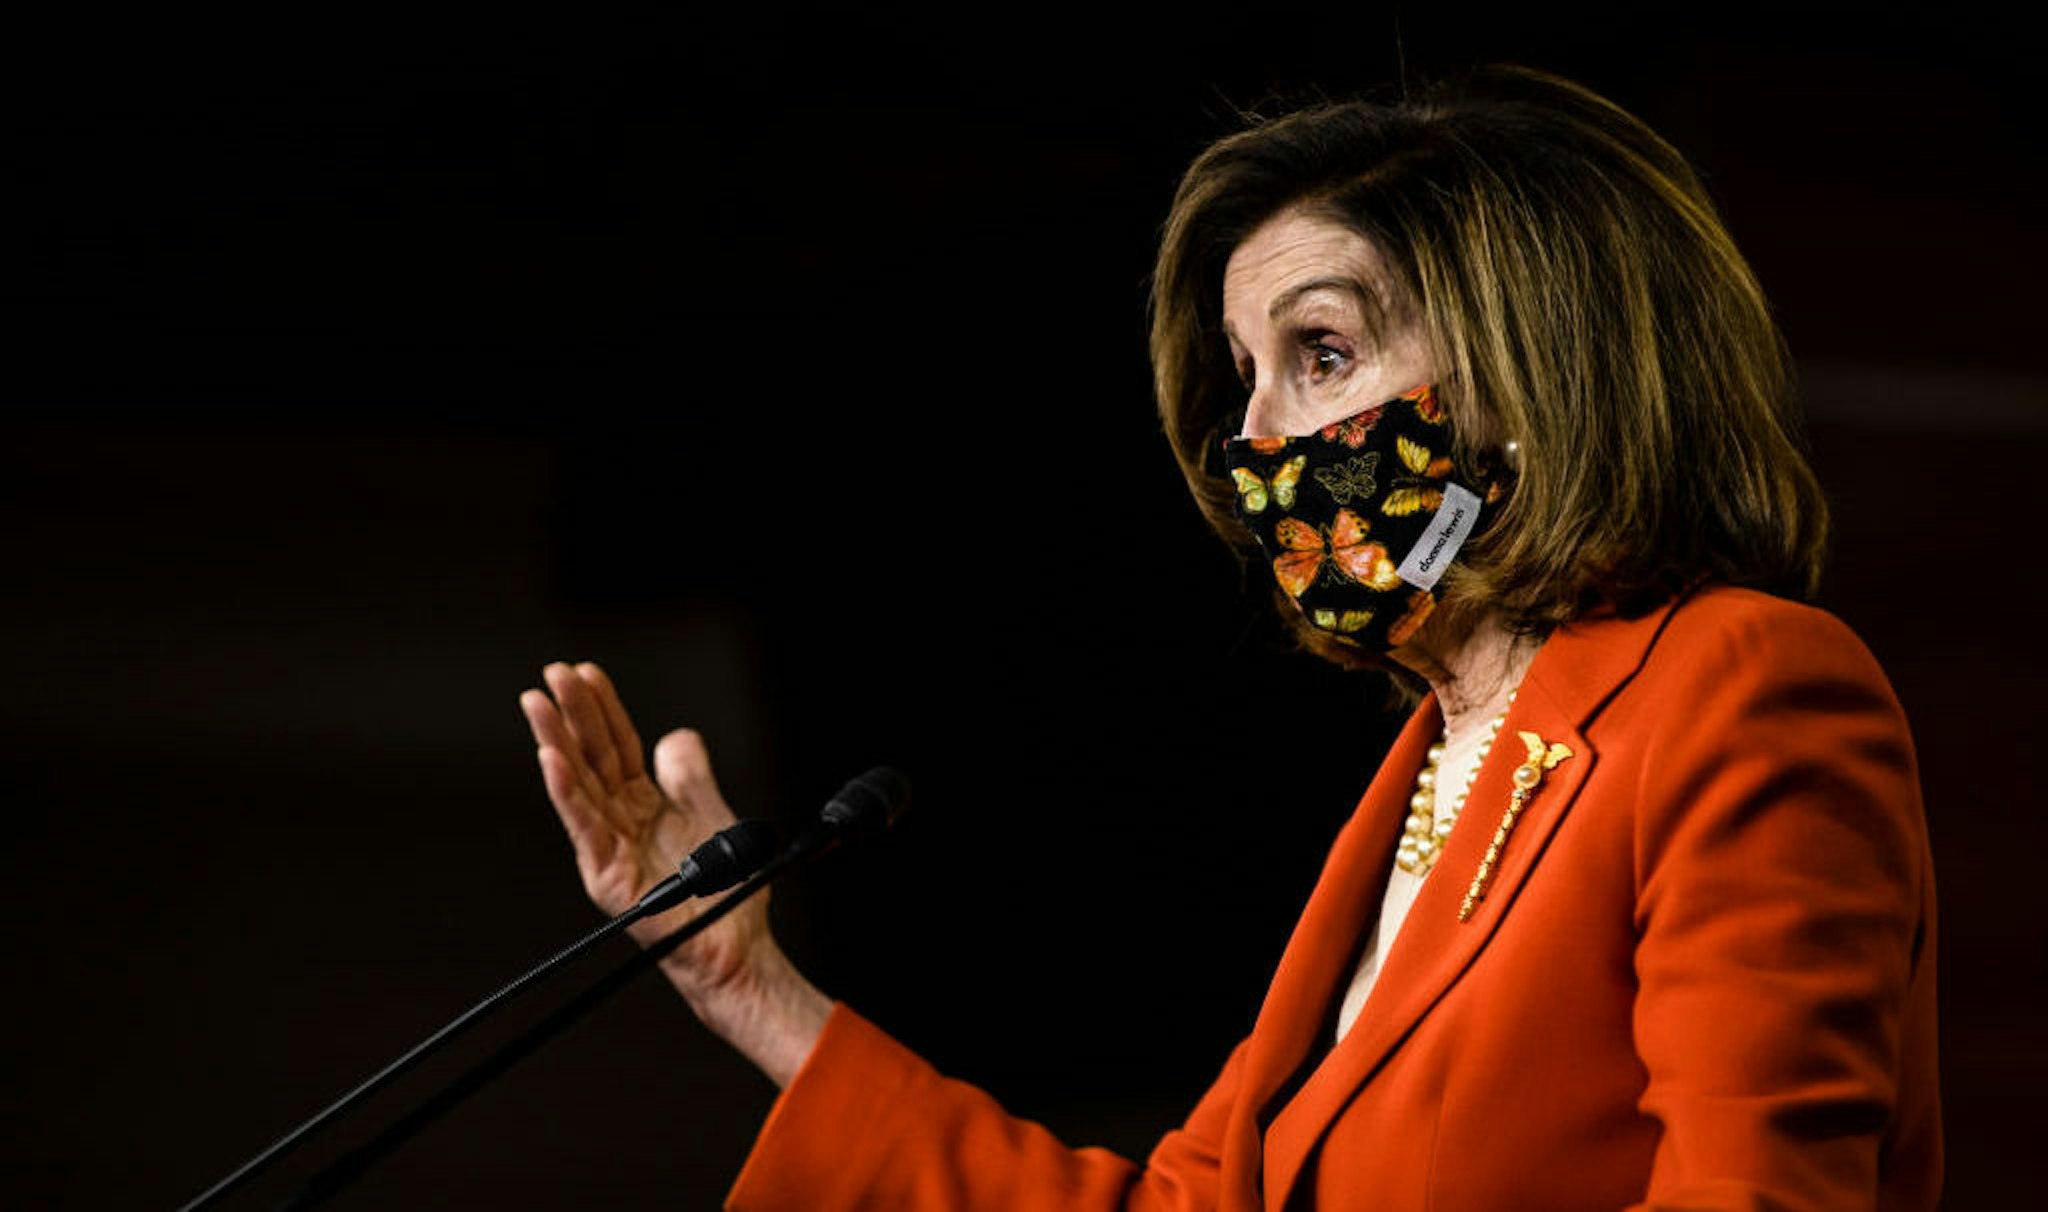 WASHINGTON, DC - JANUARY 15: Speaker of the House Nancy Pelosi (D-CA) talks during a press conference at the US Capitol on January 15, 2021 in Washington, DC. Speaker Pelosi said that it has always been the intent to have a small inauguration due to the coronavirus pandemic and that Impeachment managers are continuing to work on the trial and they will take it to the Senate but did not mention when that will happen. (Photo by Samuel Corum/Getty Images) *** Local Caption *** Nancy Pelosi